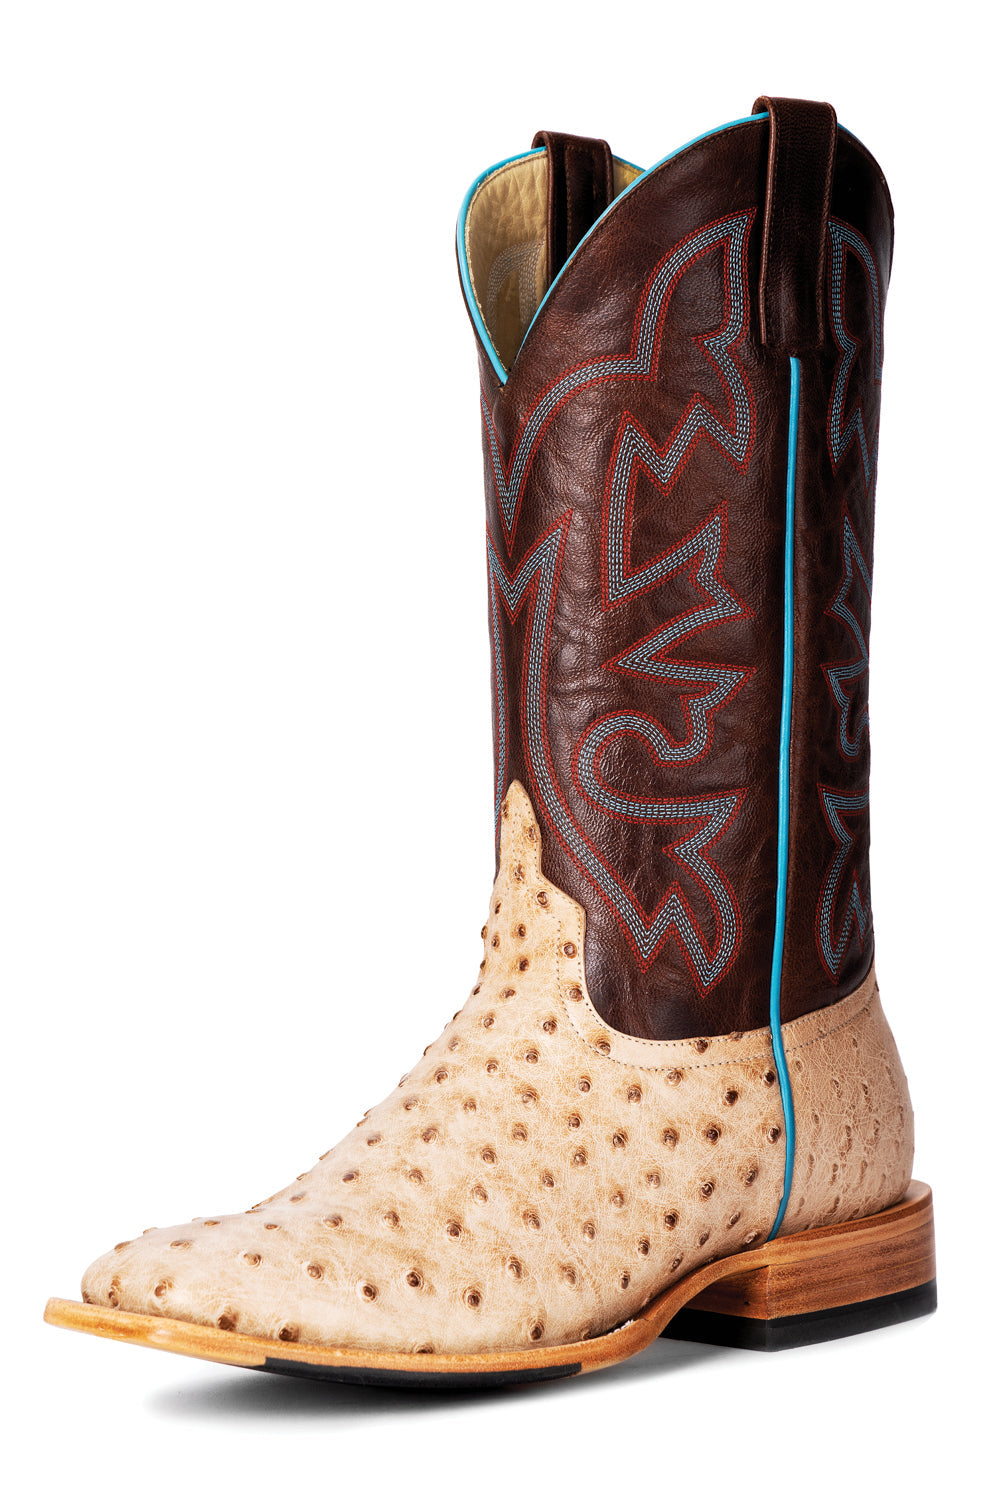 Women's Anderson Bean Denim Blue Full Quill Ostrich Western Boots  *Exclusive Style - The Boot Store